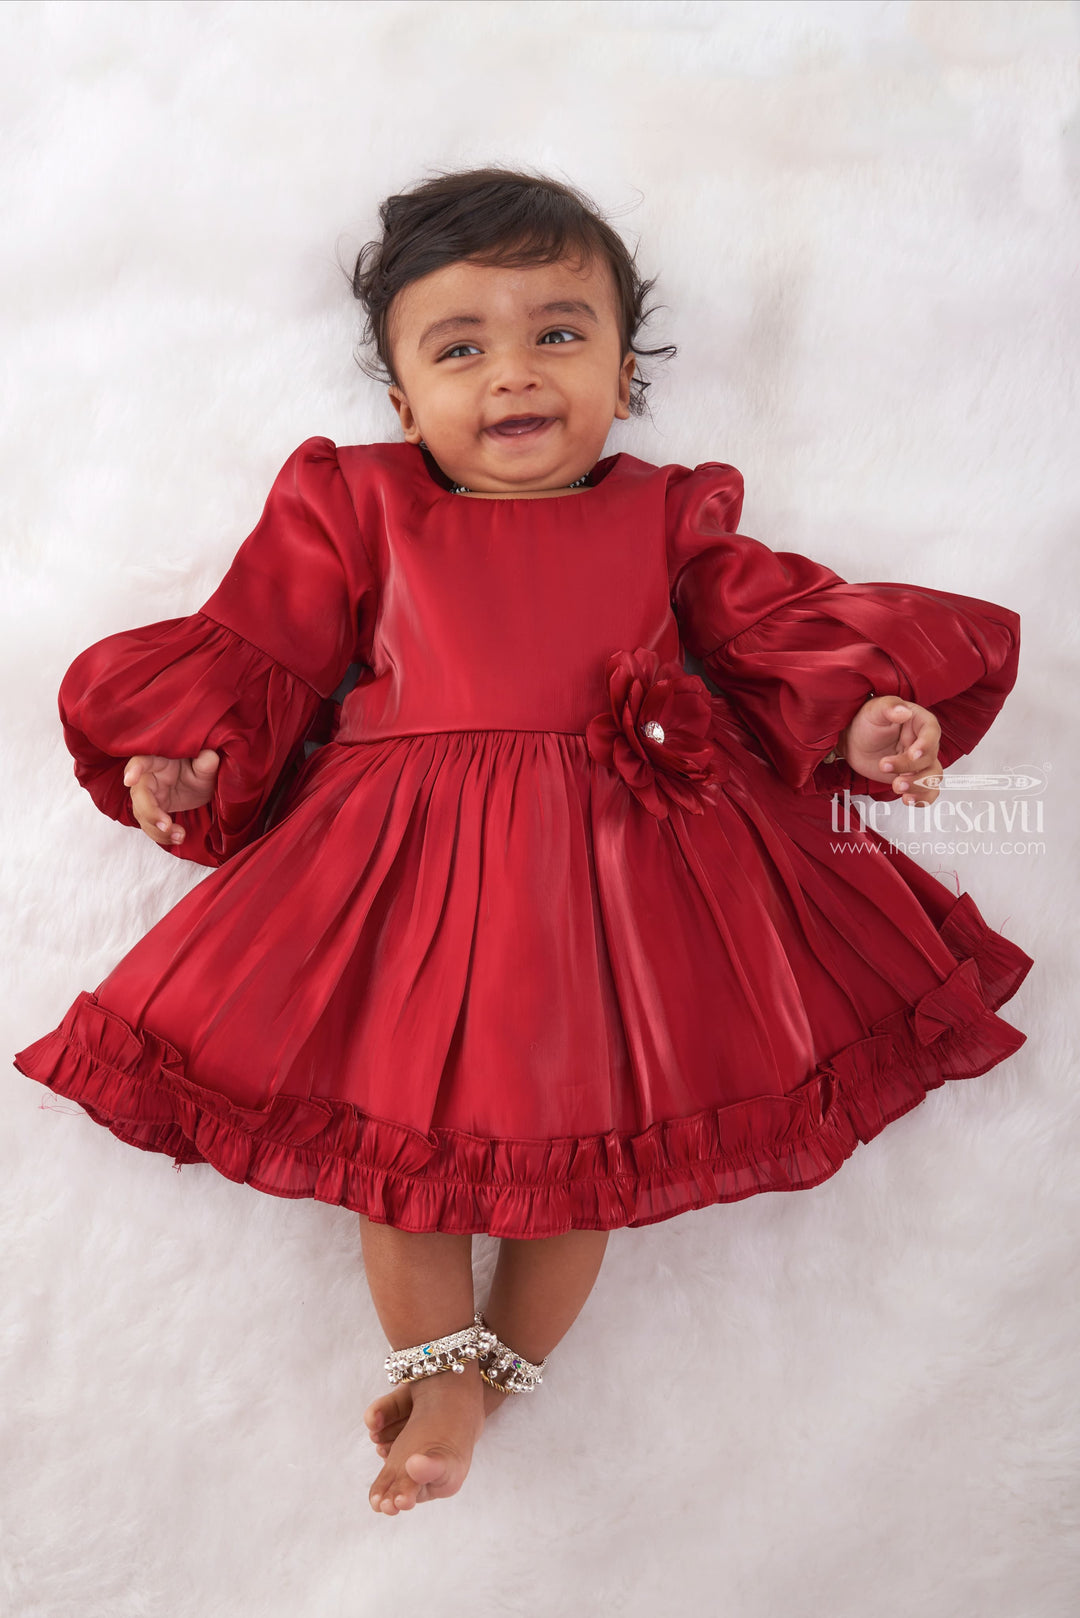 The Nesavu Baby Fancy Frock Lustrous Ruby Red Organza Baby Dress with Exquisite Floral Detail Nesavu 14 (6M) / Red / Organza Plain BFJ476C-14 Little Baby Frocks for Diwali Festives | Premium Baby Frocks for Girls | The Nesavu